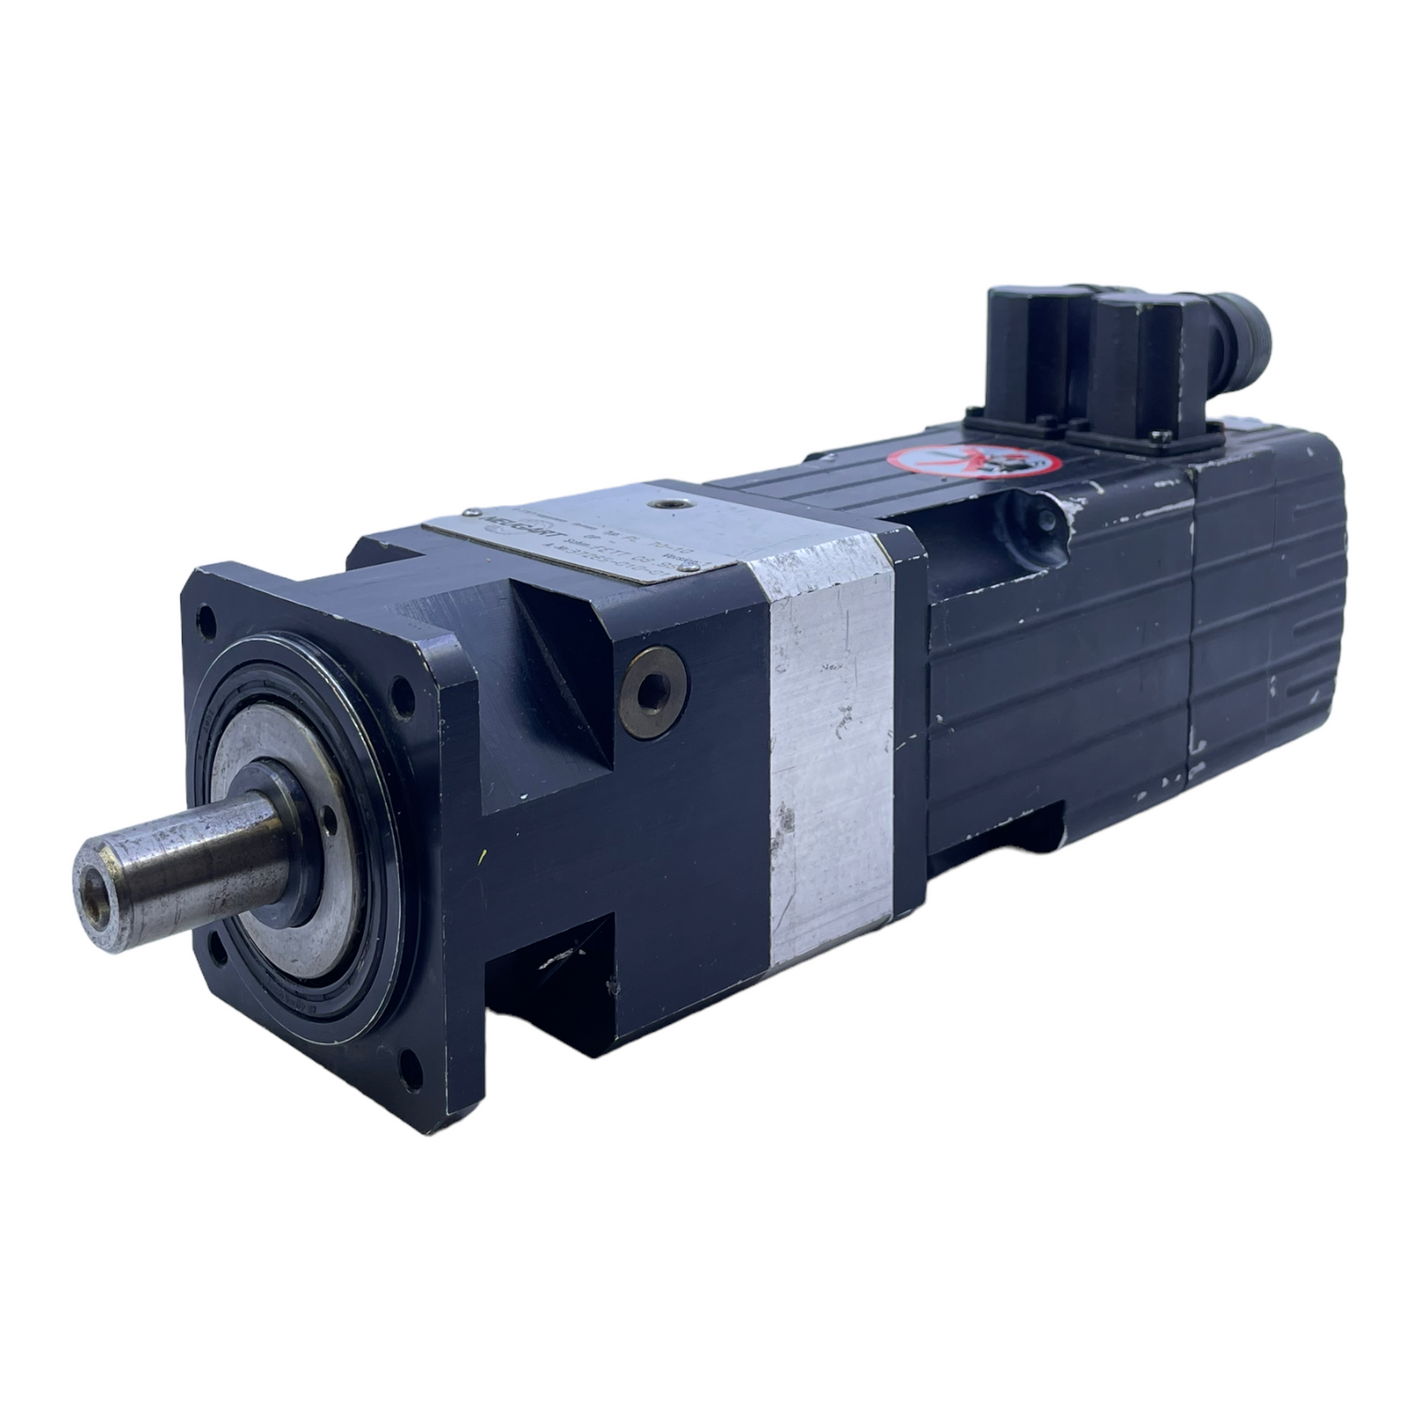 Moog GL15 servo motor with gearbox for industrial use 325V 0.95kW motor